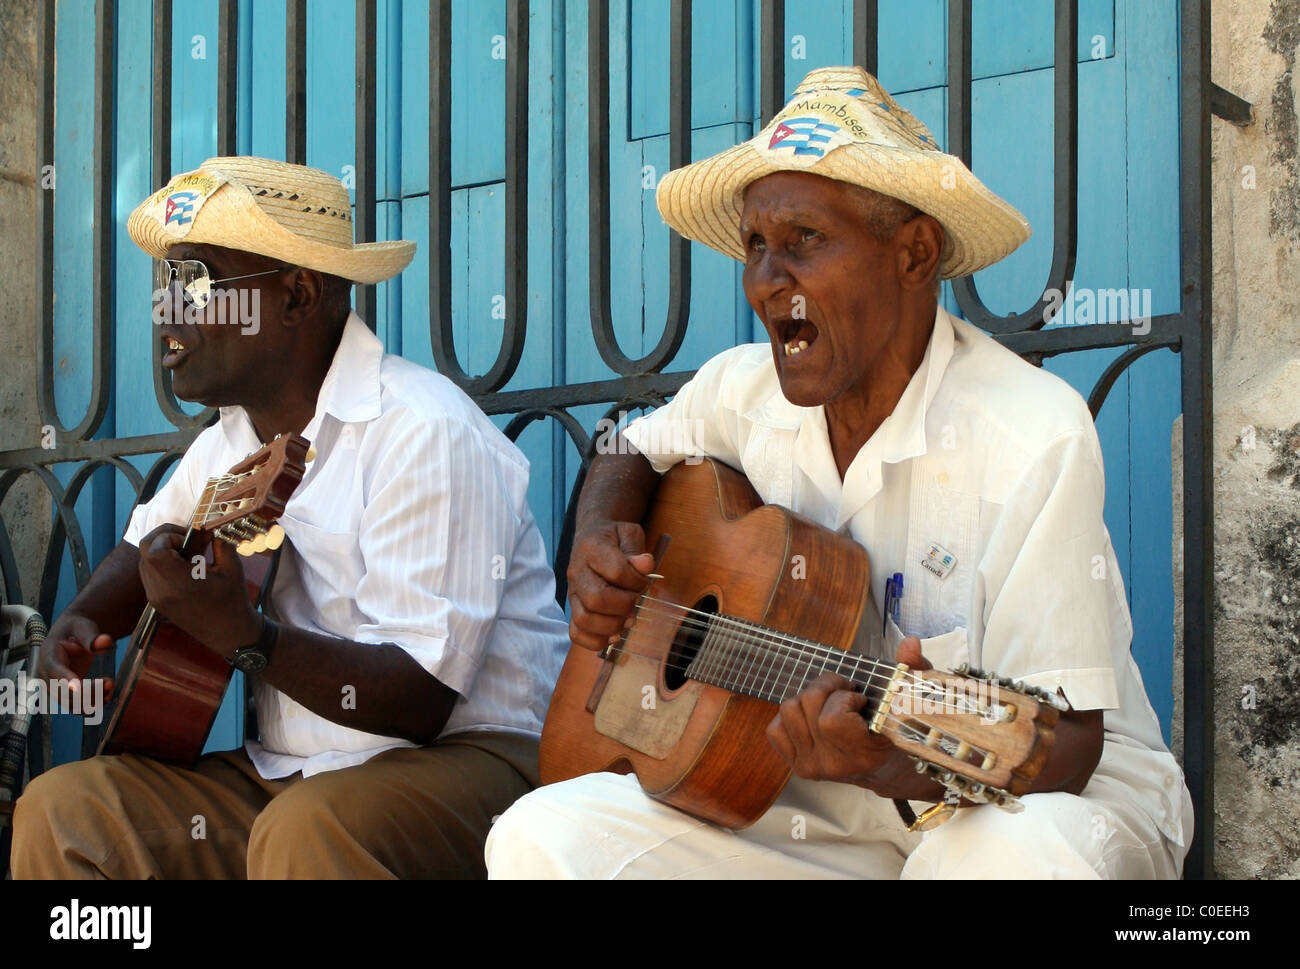 Guitar players from the Los Mambises street band. Stock Photo